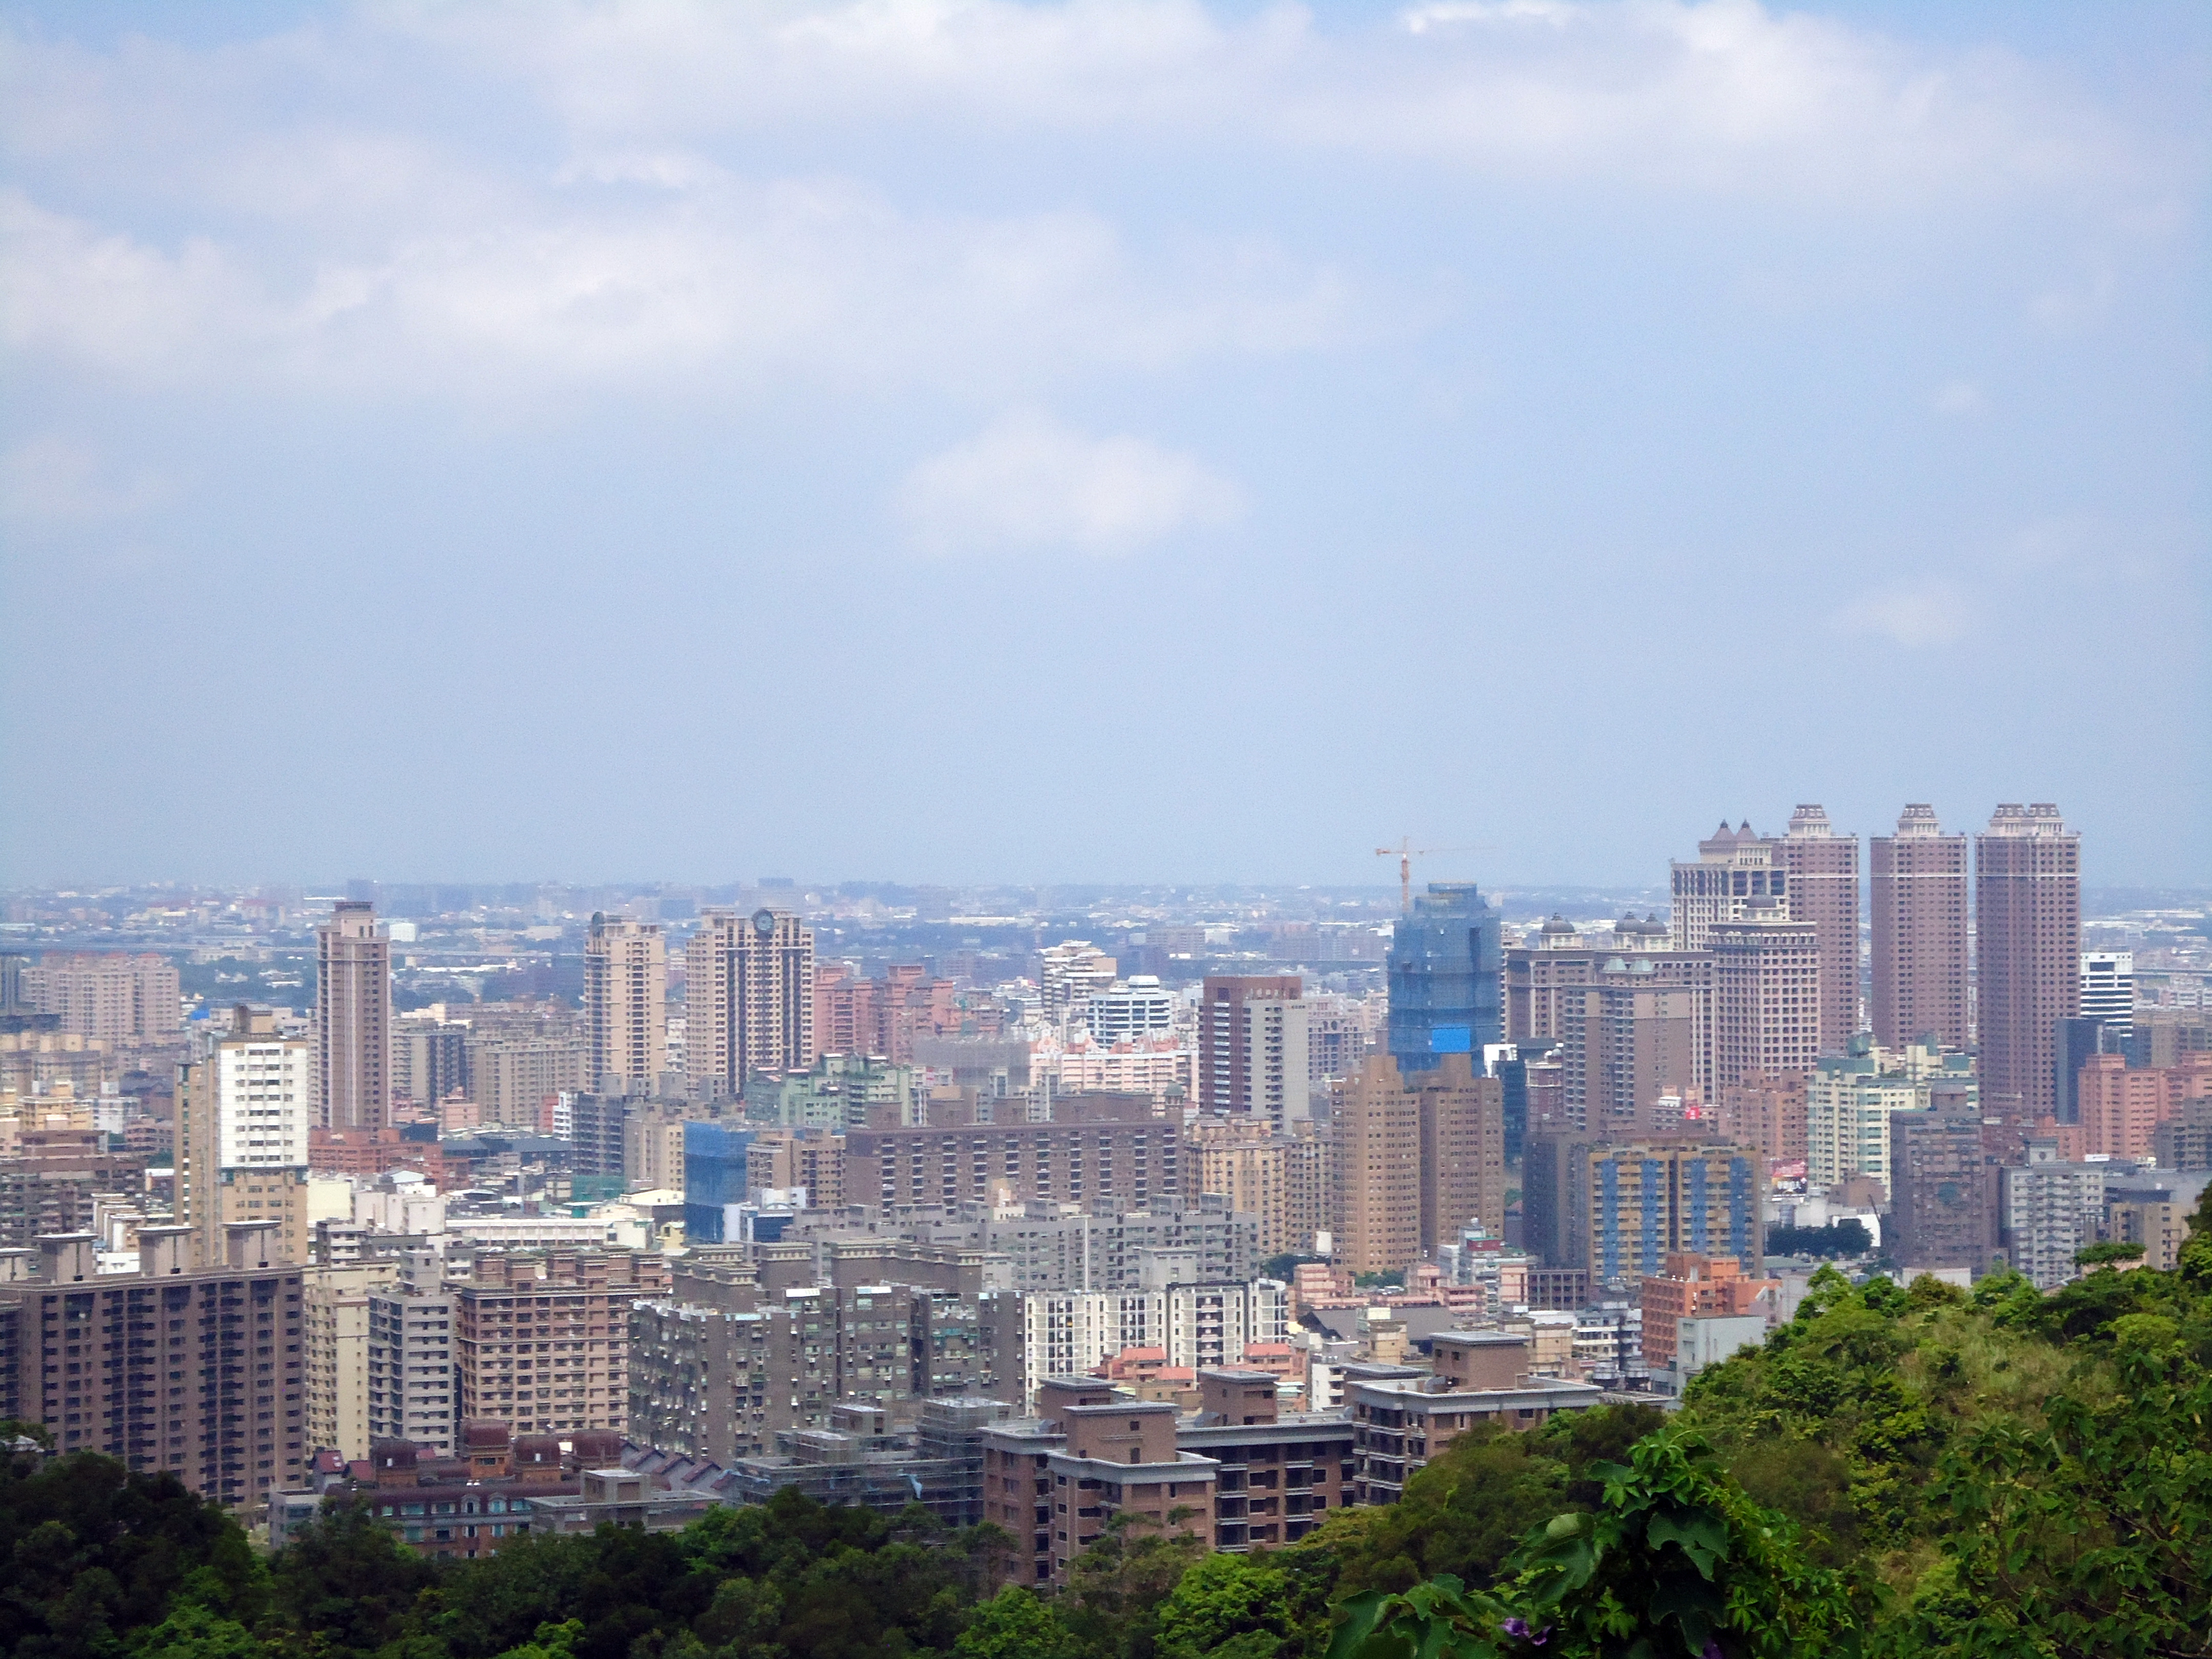 File:Taoyuan City Overview.jpg - Wikimedia Commons